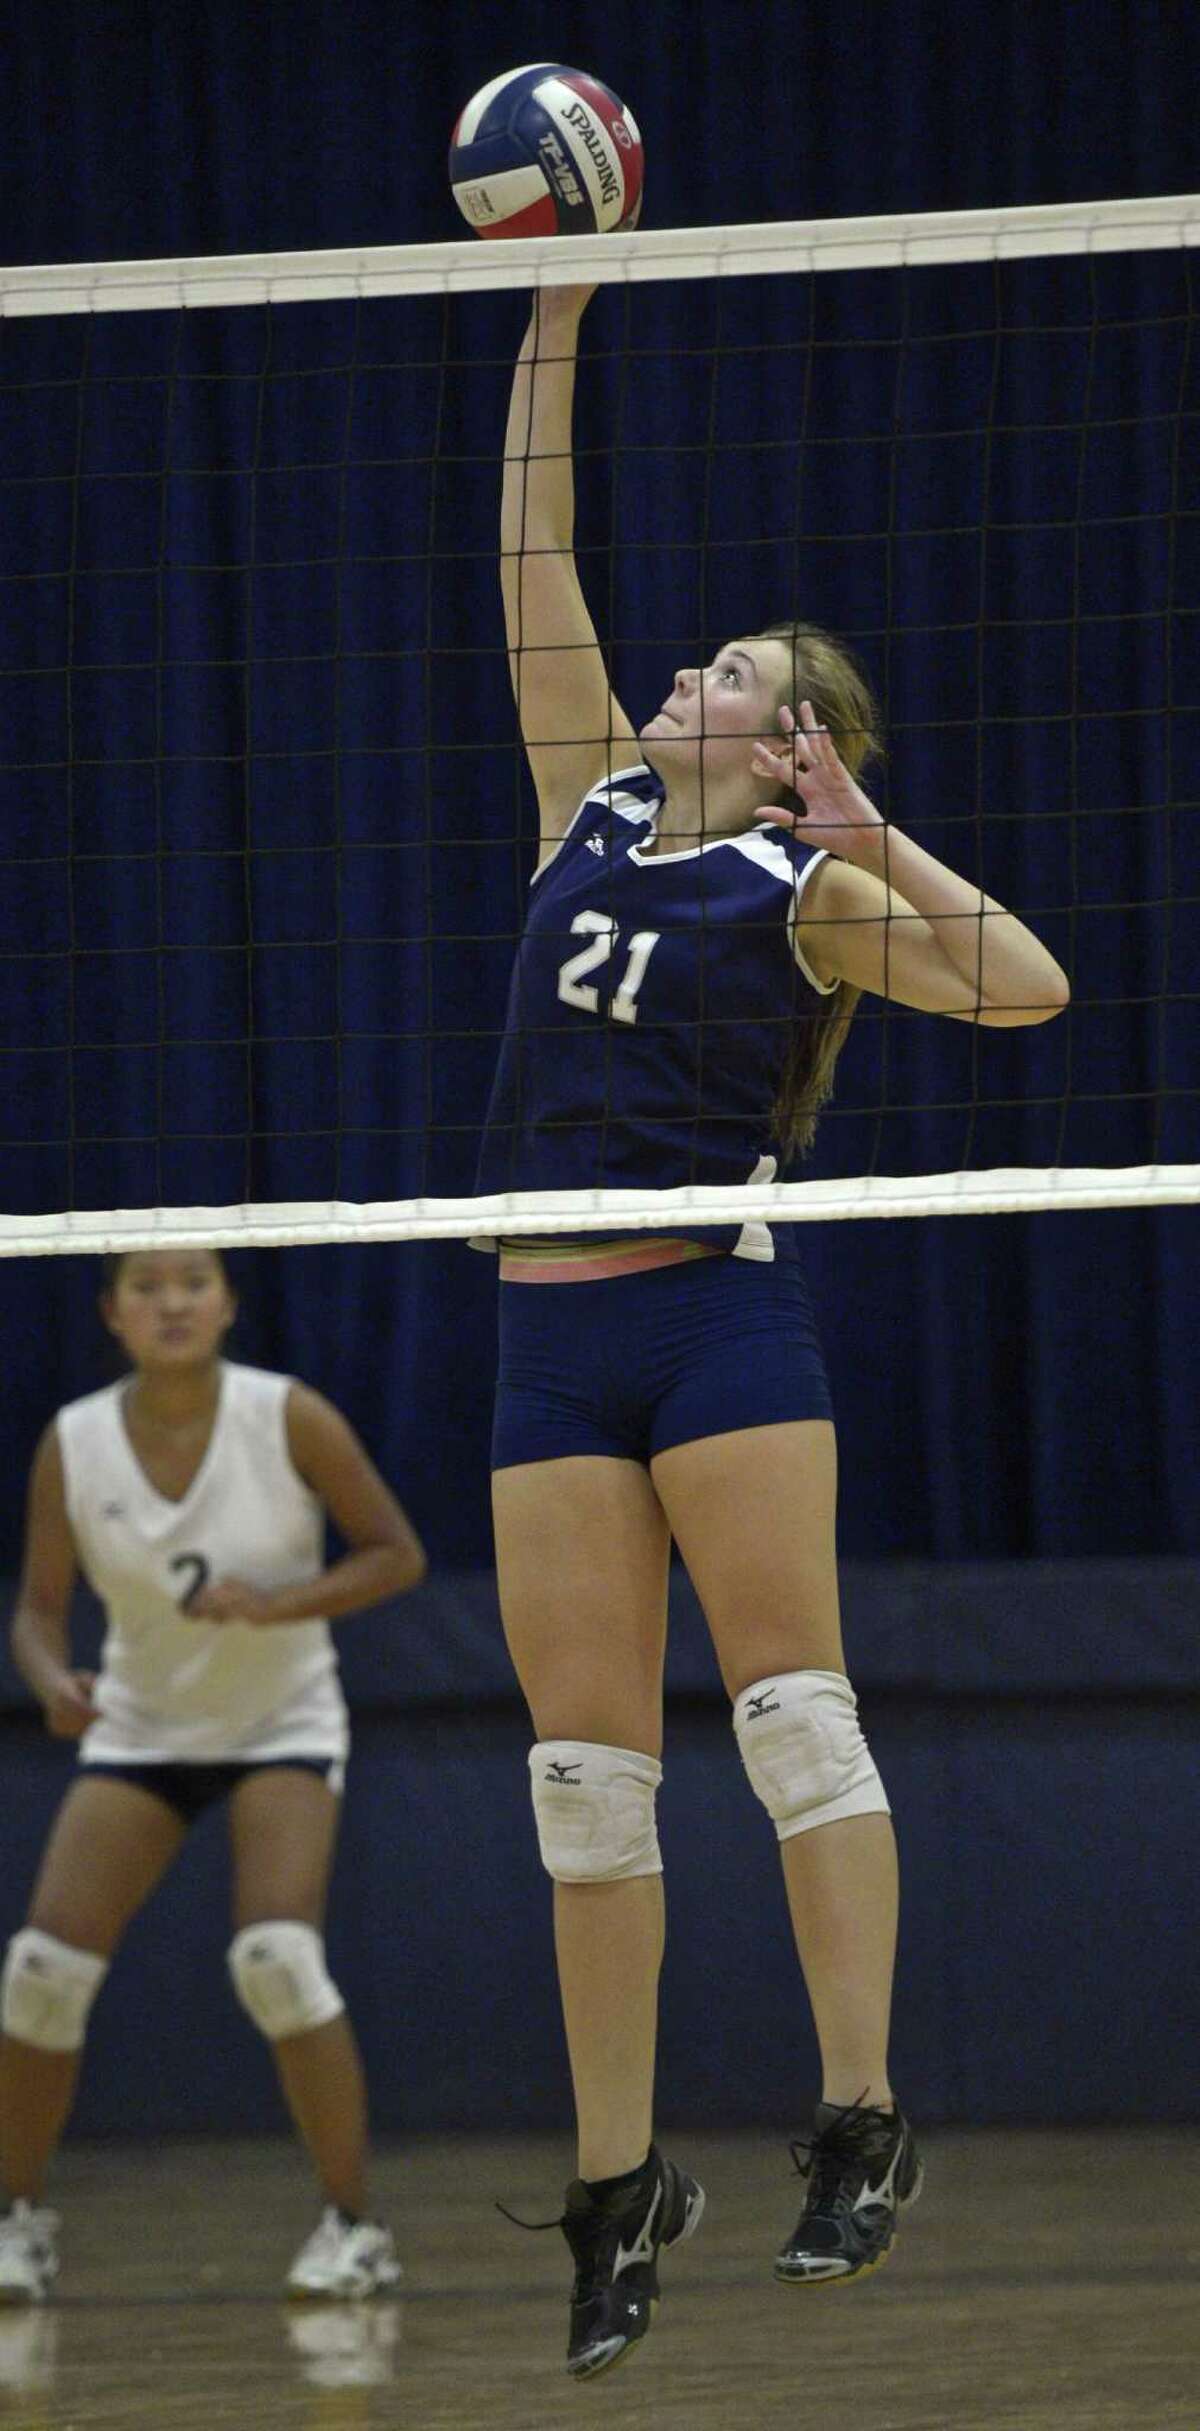 FILE PHOTO: Immaculate's Rachel Hewitt (21) goes up for the spike in the girls high school volleyball match between Henry Abbott Technical and Immaculate high school on Wednesday afternoon, September 23, 2015, at Immaculate High School, in Danbury, Conn.